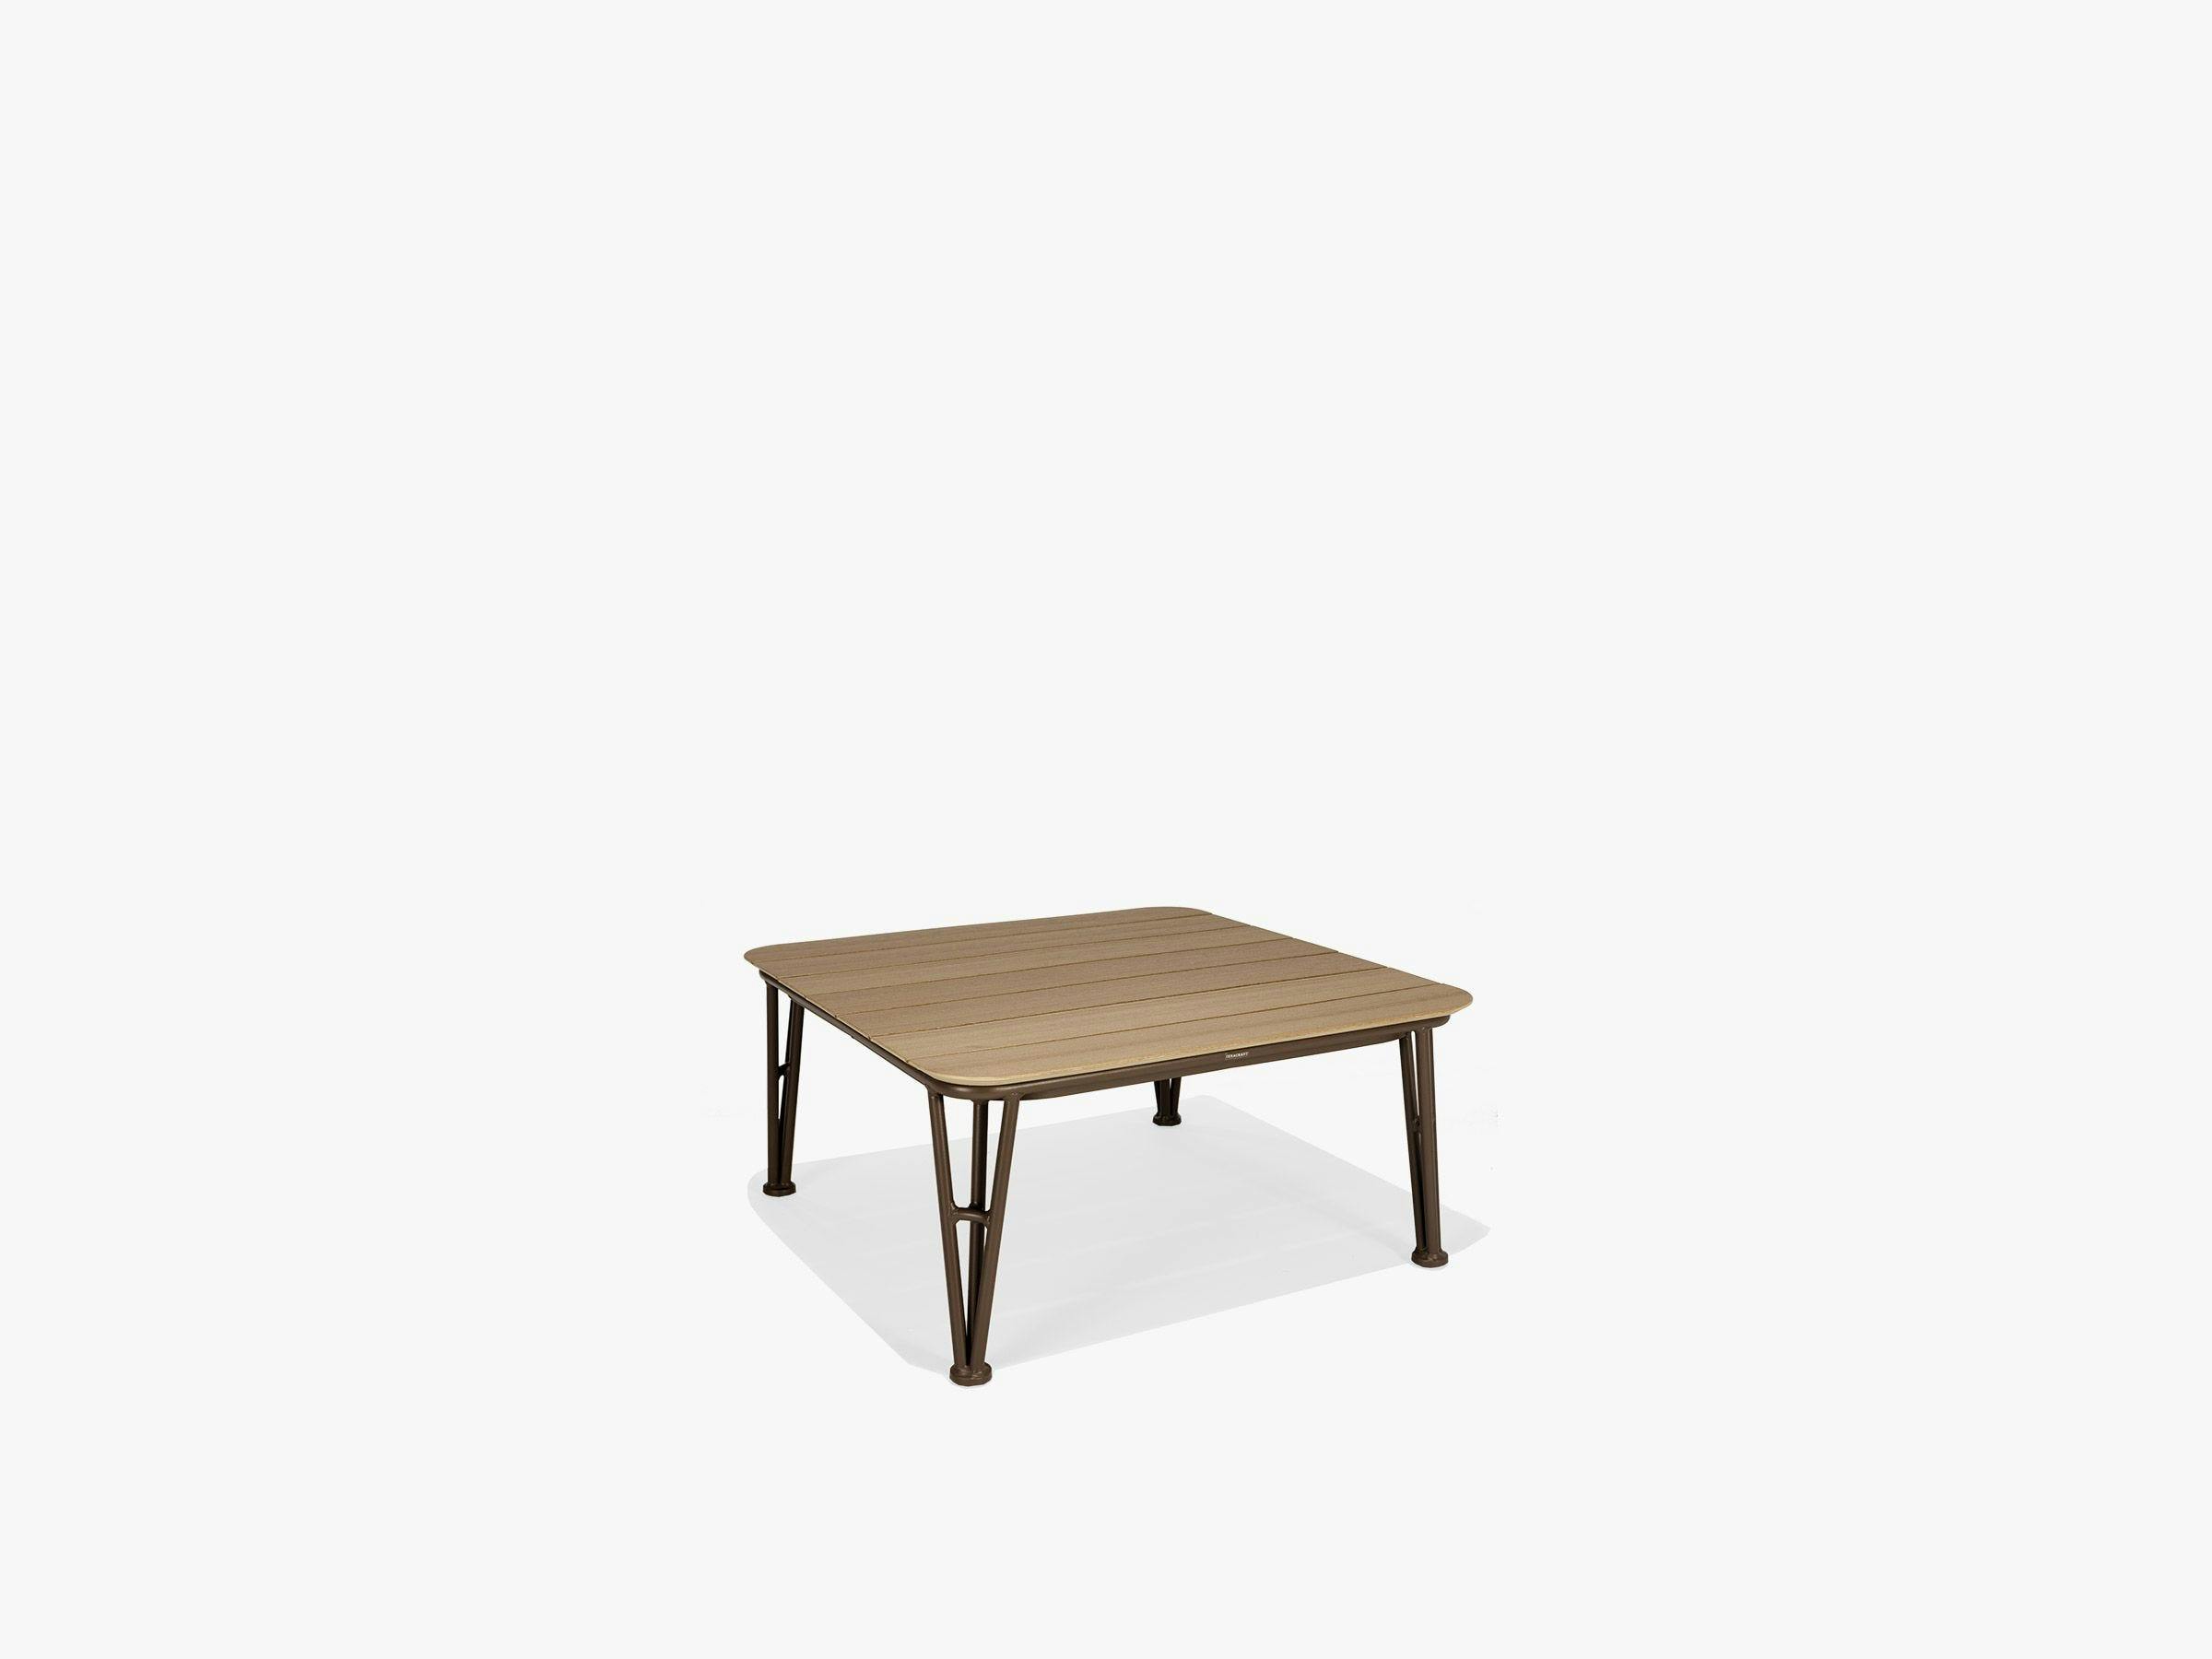 Fountainhead 40" Square Cocktail Table